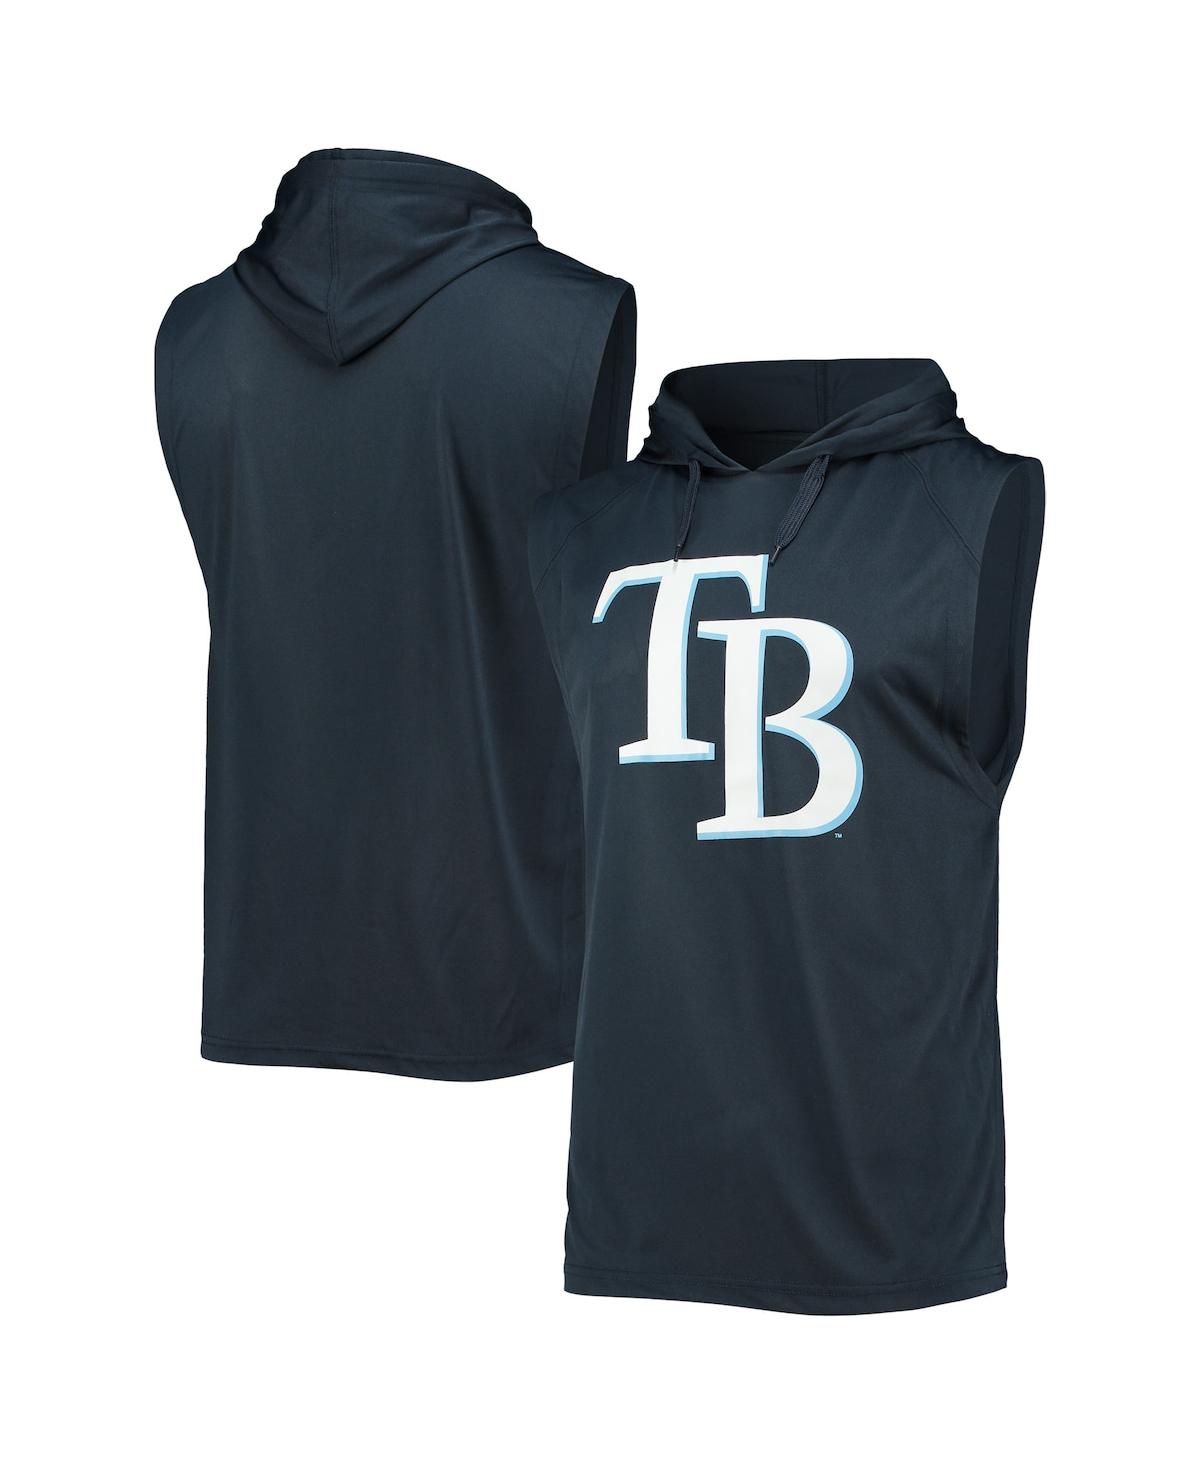 STITCHES MEN'S STITCHES NAVY TAMPA BAY RAYS SLEEVELESS PULLOVER HOODIE